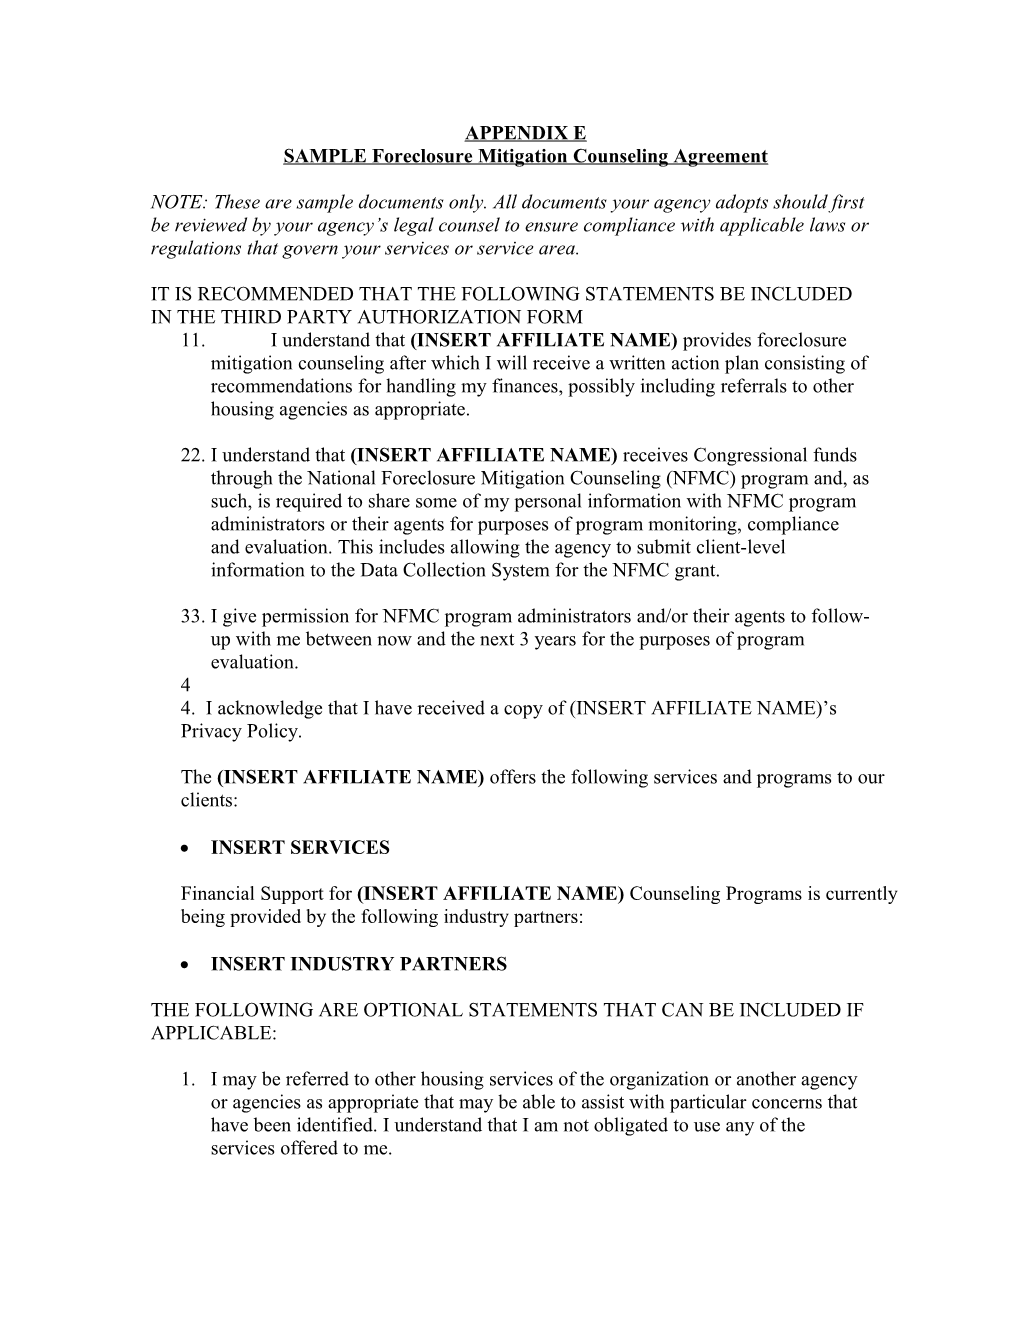 SAMPLE Foreclosure Mitigation Counseling Agreement